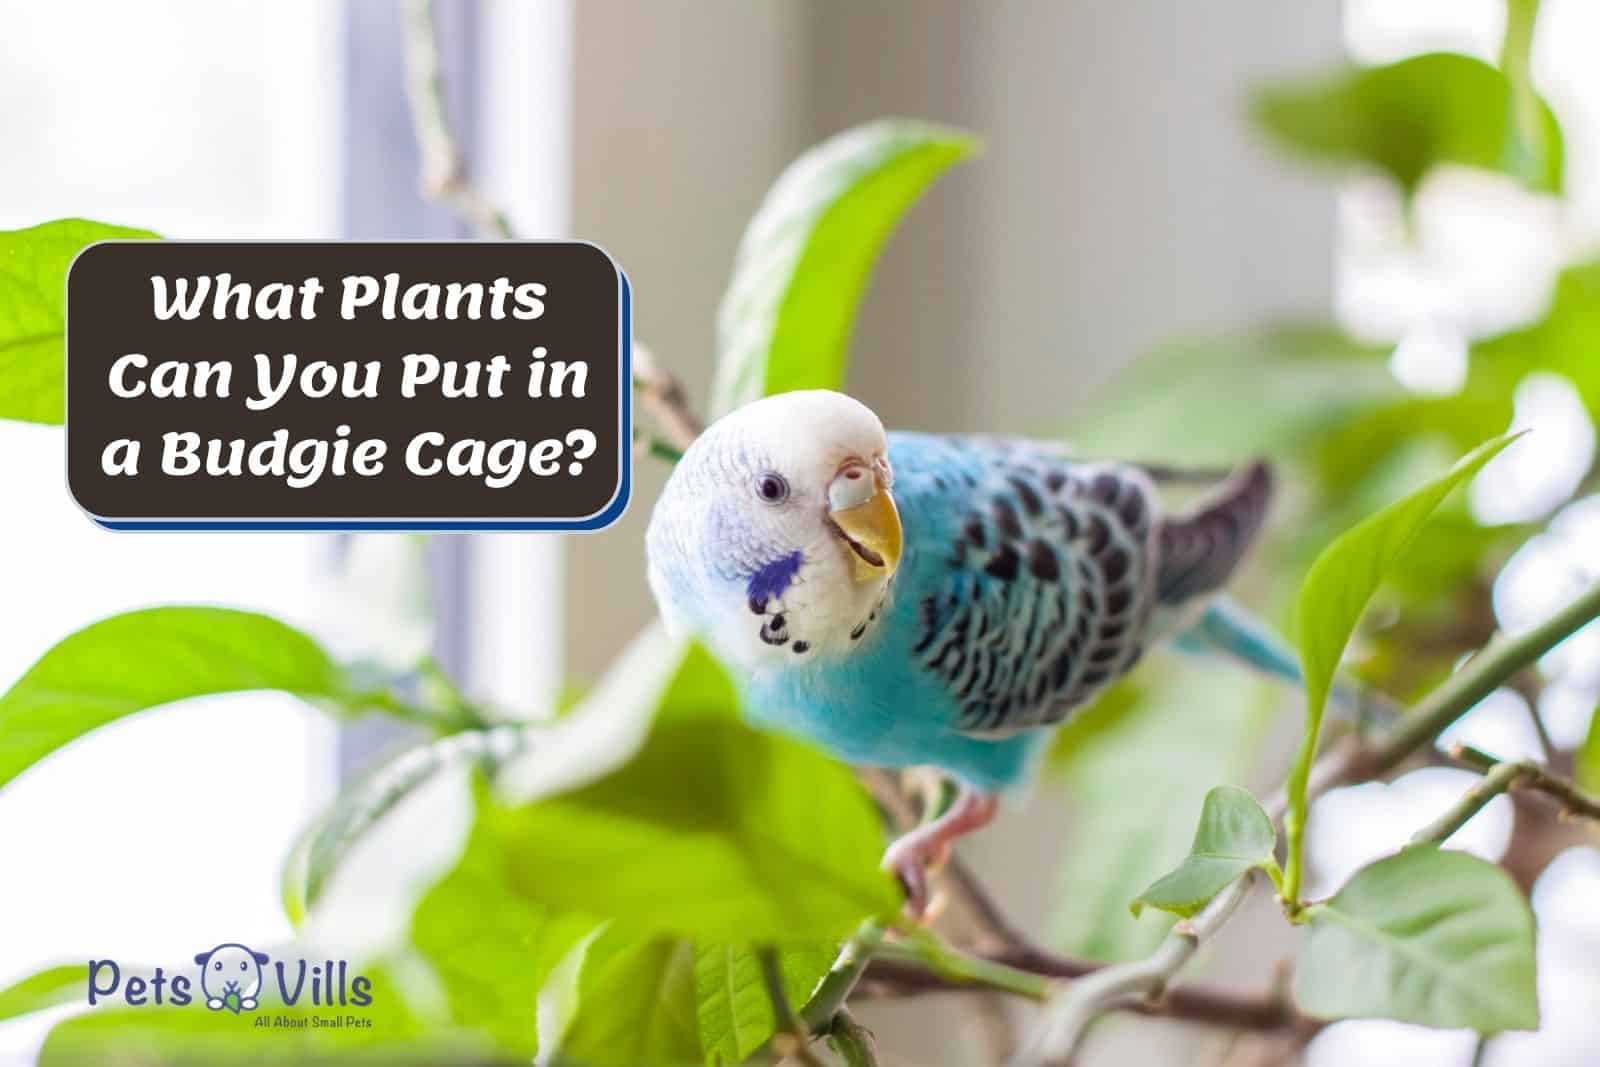 What Plants Can You Put in a Budgie Cage